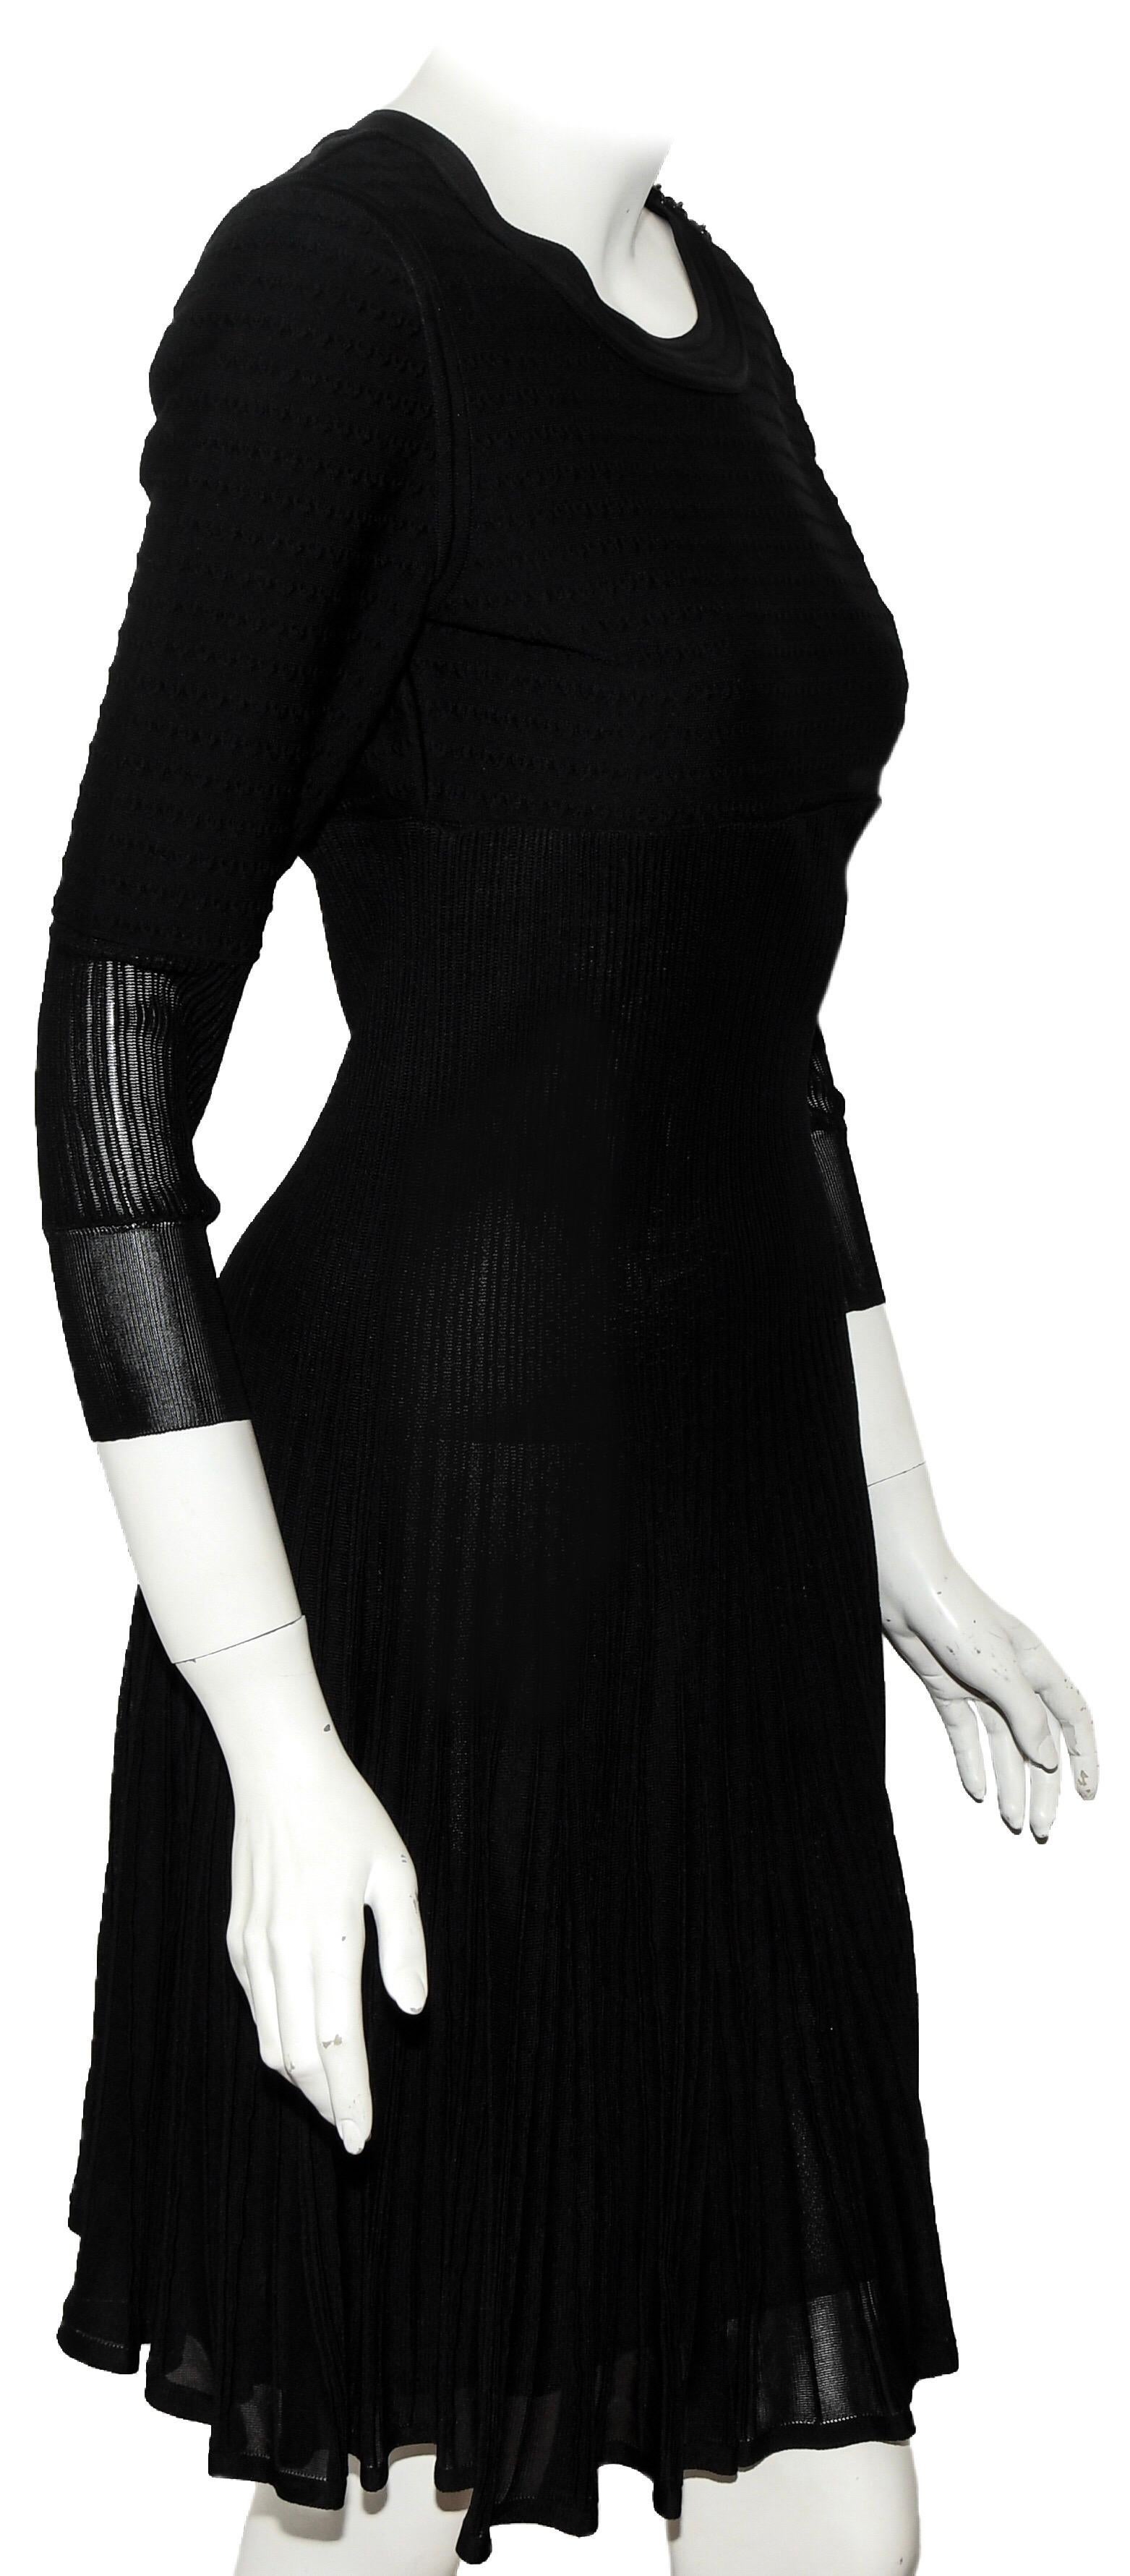 Women's Chanel Black Knit Silk Blend Pleated Long Sleeve Dress 2009 Cruise Collection